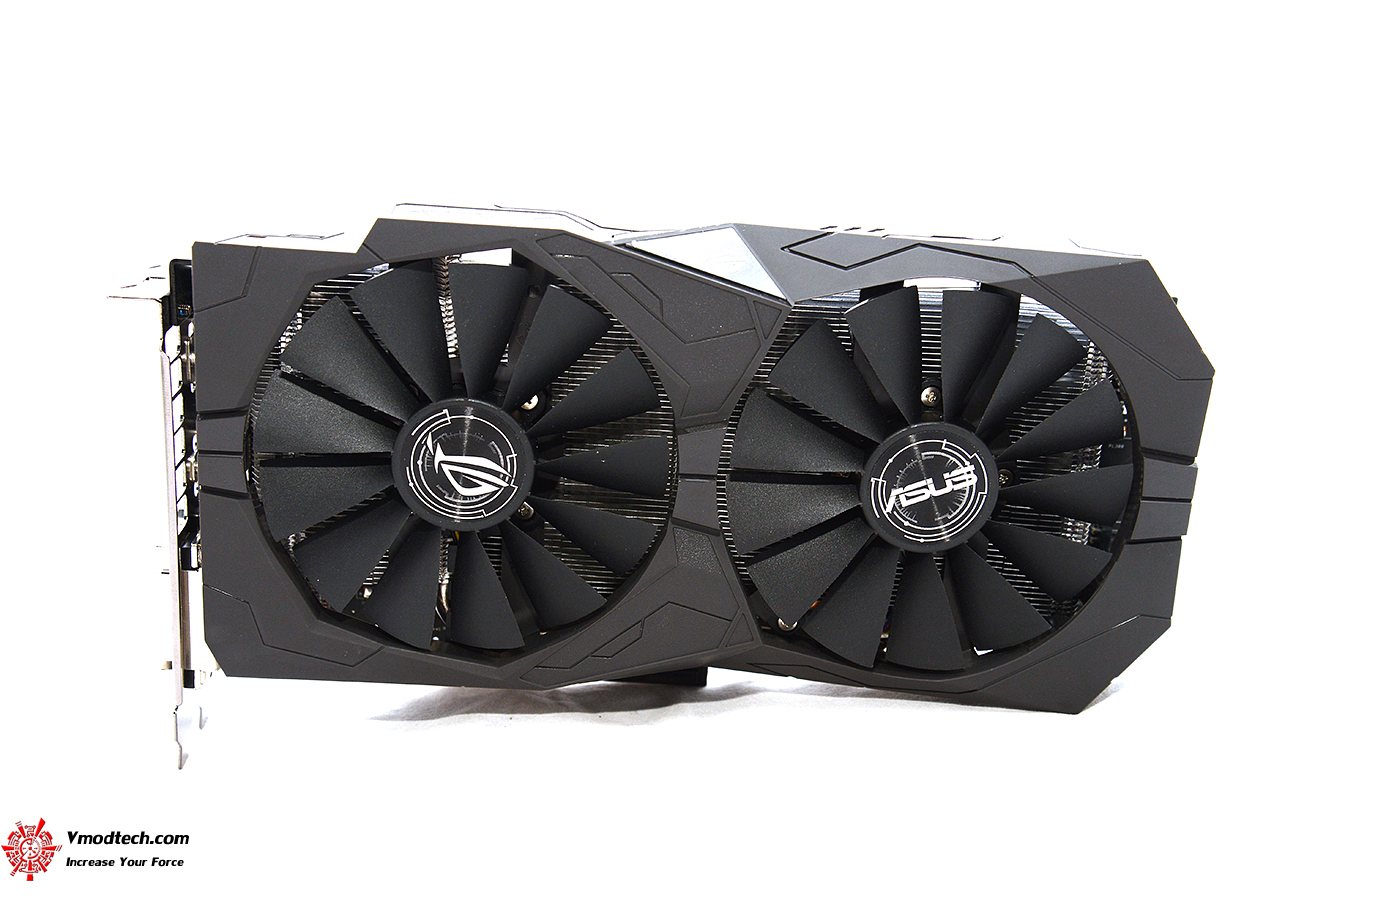 dsc 3613 ASUS ROG STRIX RX470 4G GAMING REVIEW